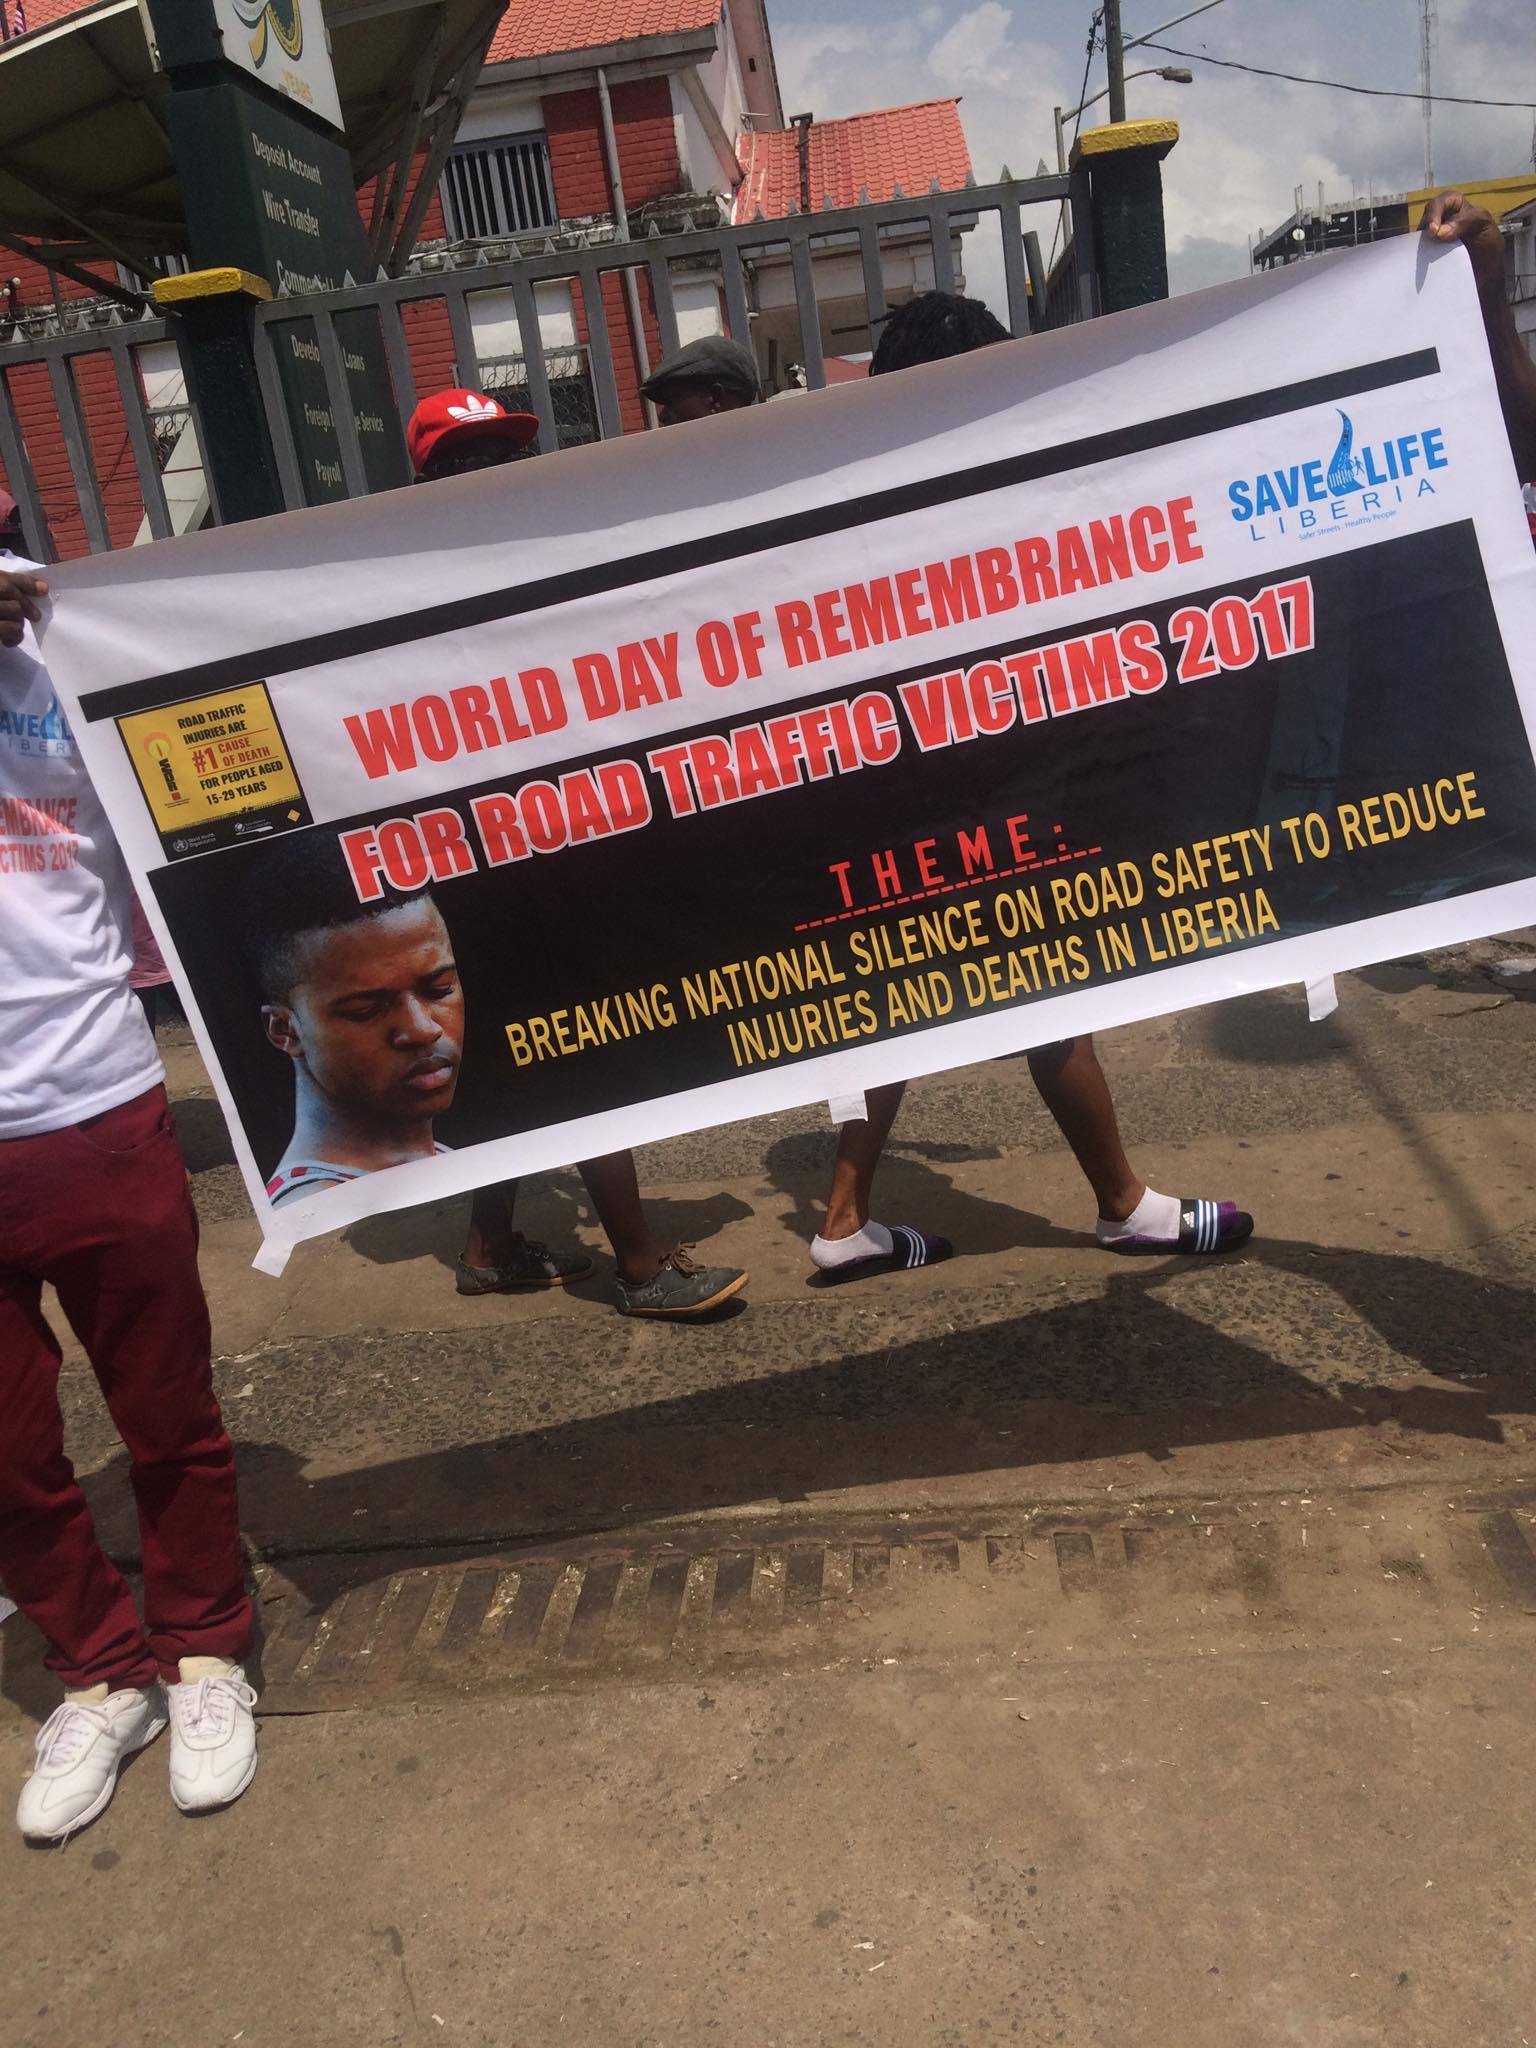 Liberian Popular Music Star Remembered at WDoR - Global Alliance of NGOs for Road Safety